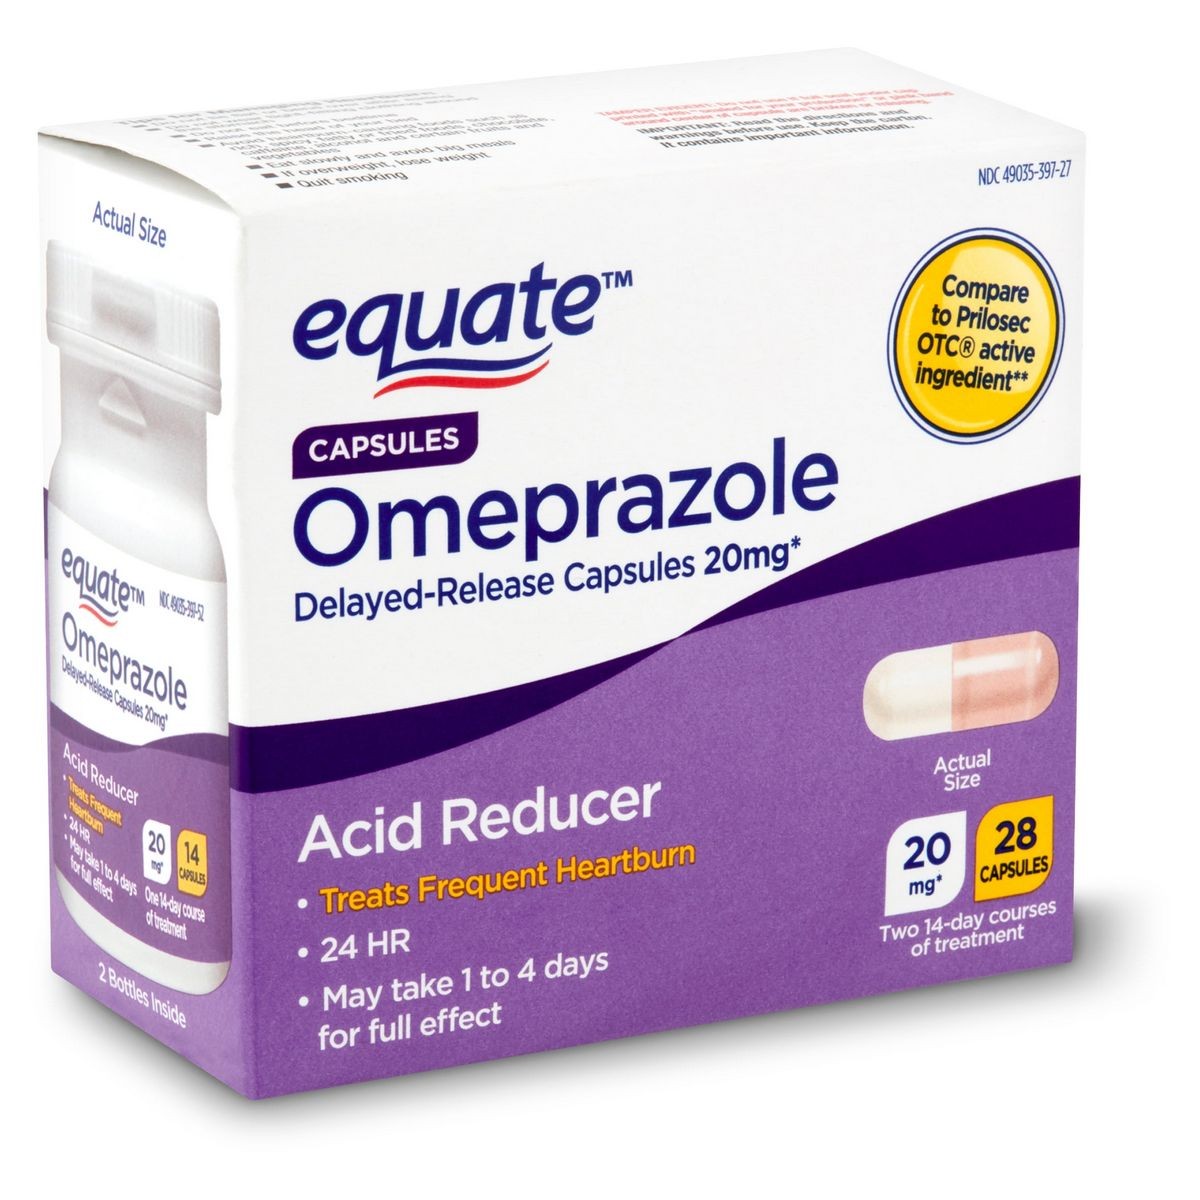 OMEPRAZOLE DELAYED RELEASE TABLET - ORAL side effects medical uses and drug interactions